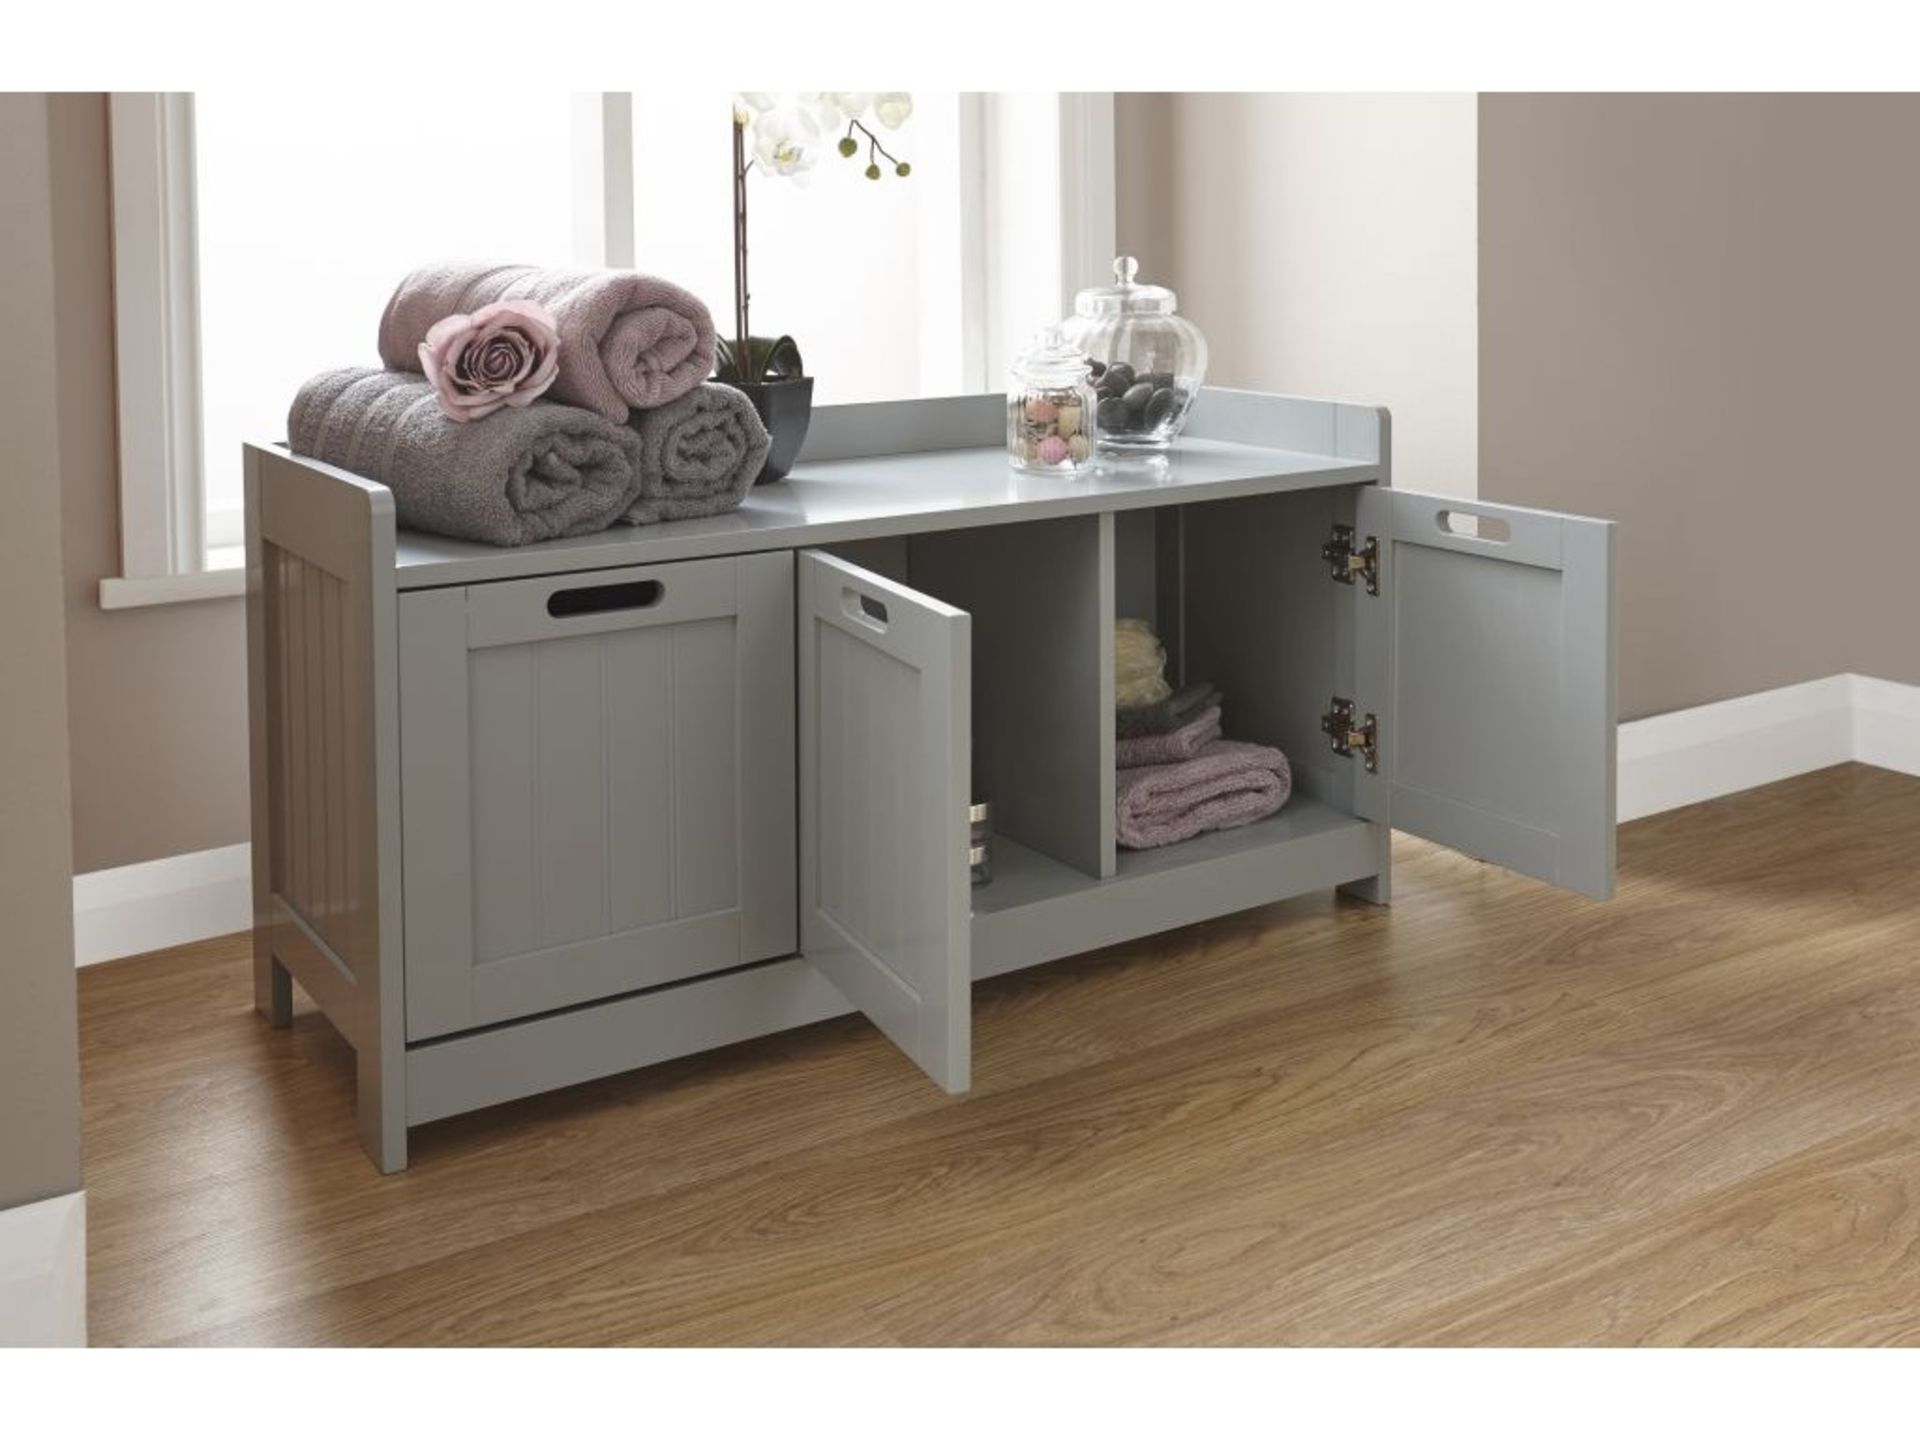 90 x 45cm Free-Standing Cabinet - RRP £72.99 - Image 2 of 2